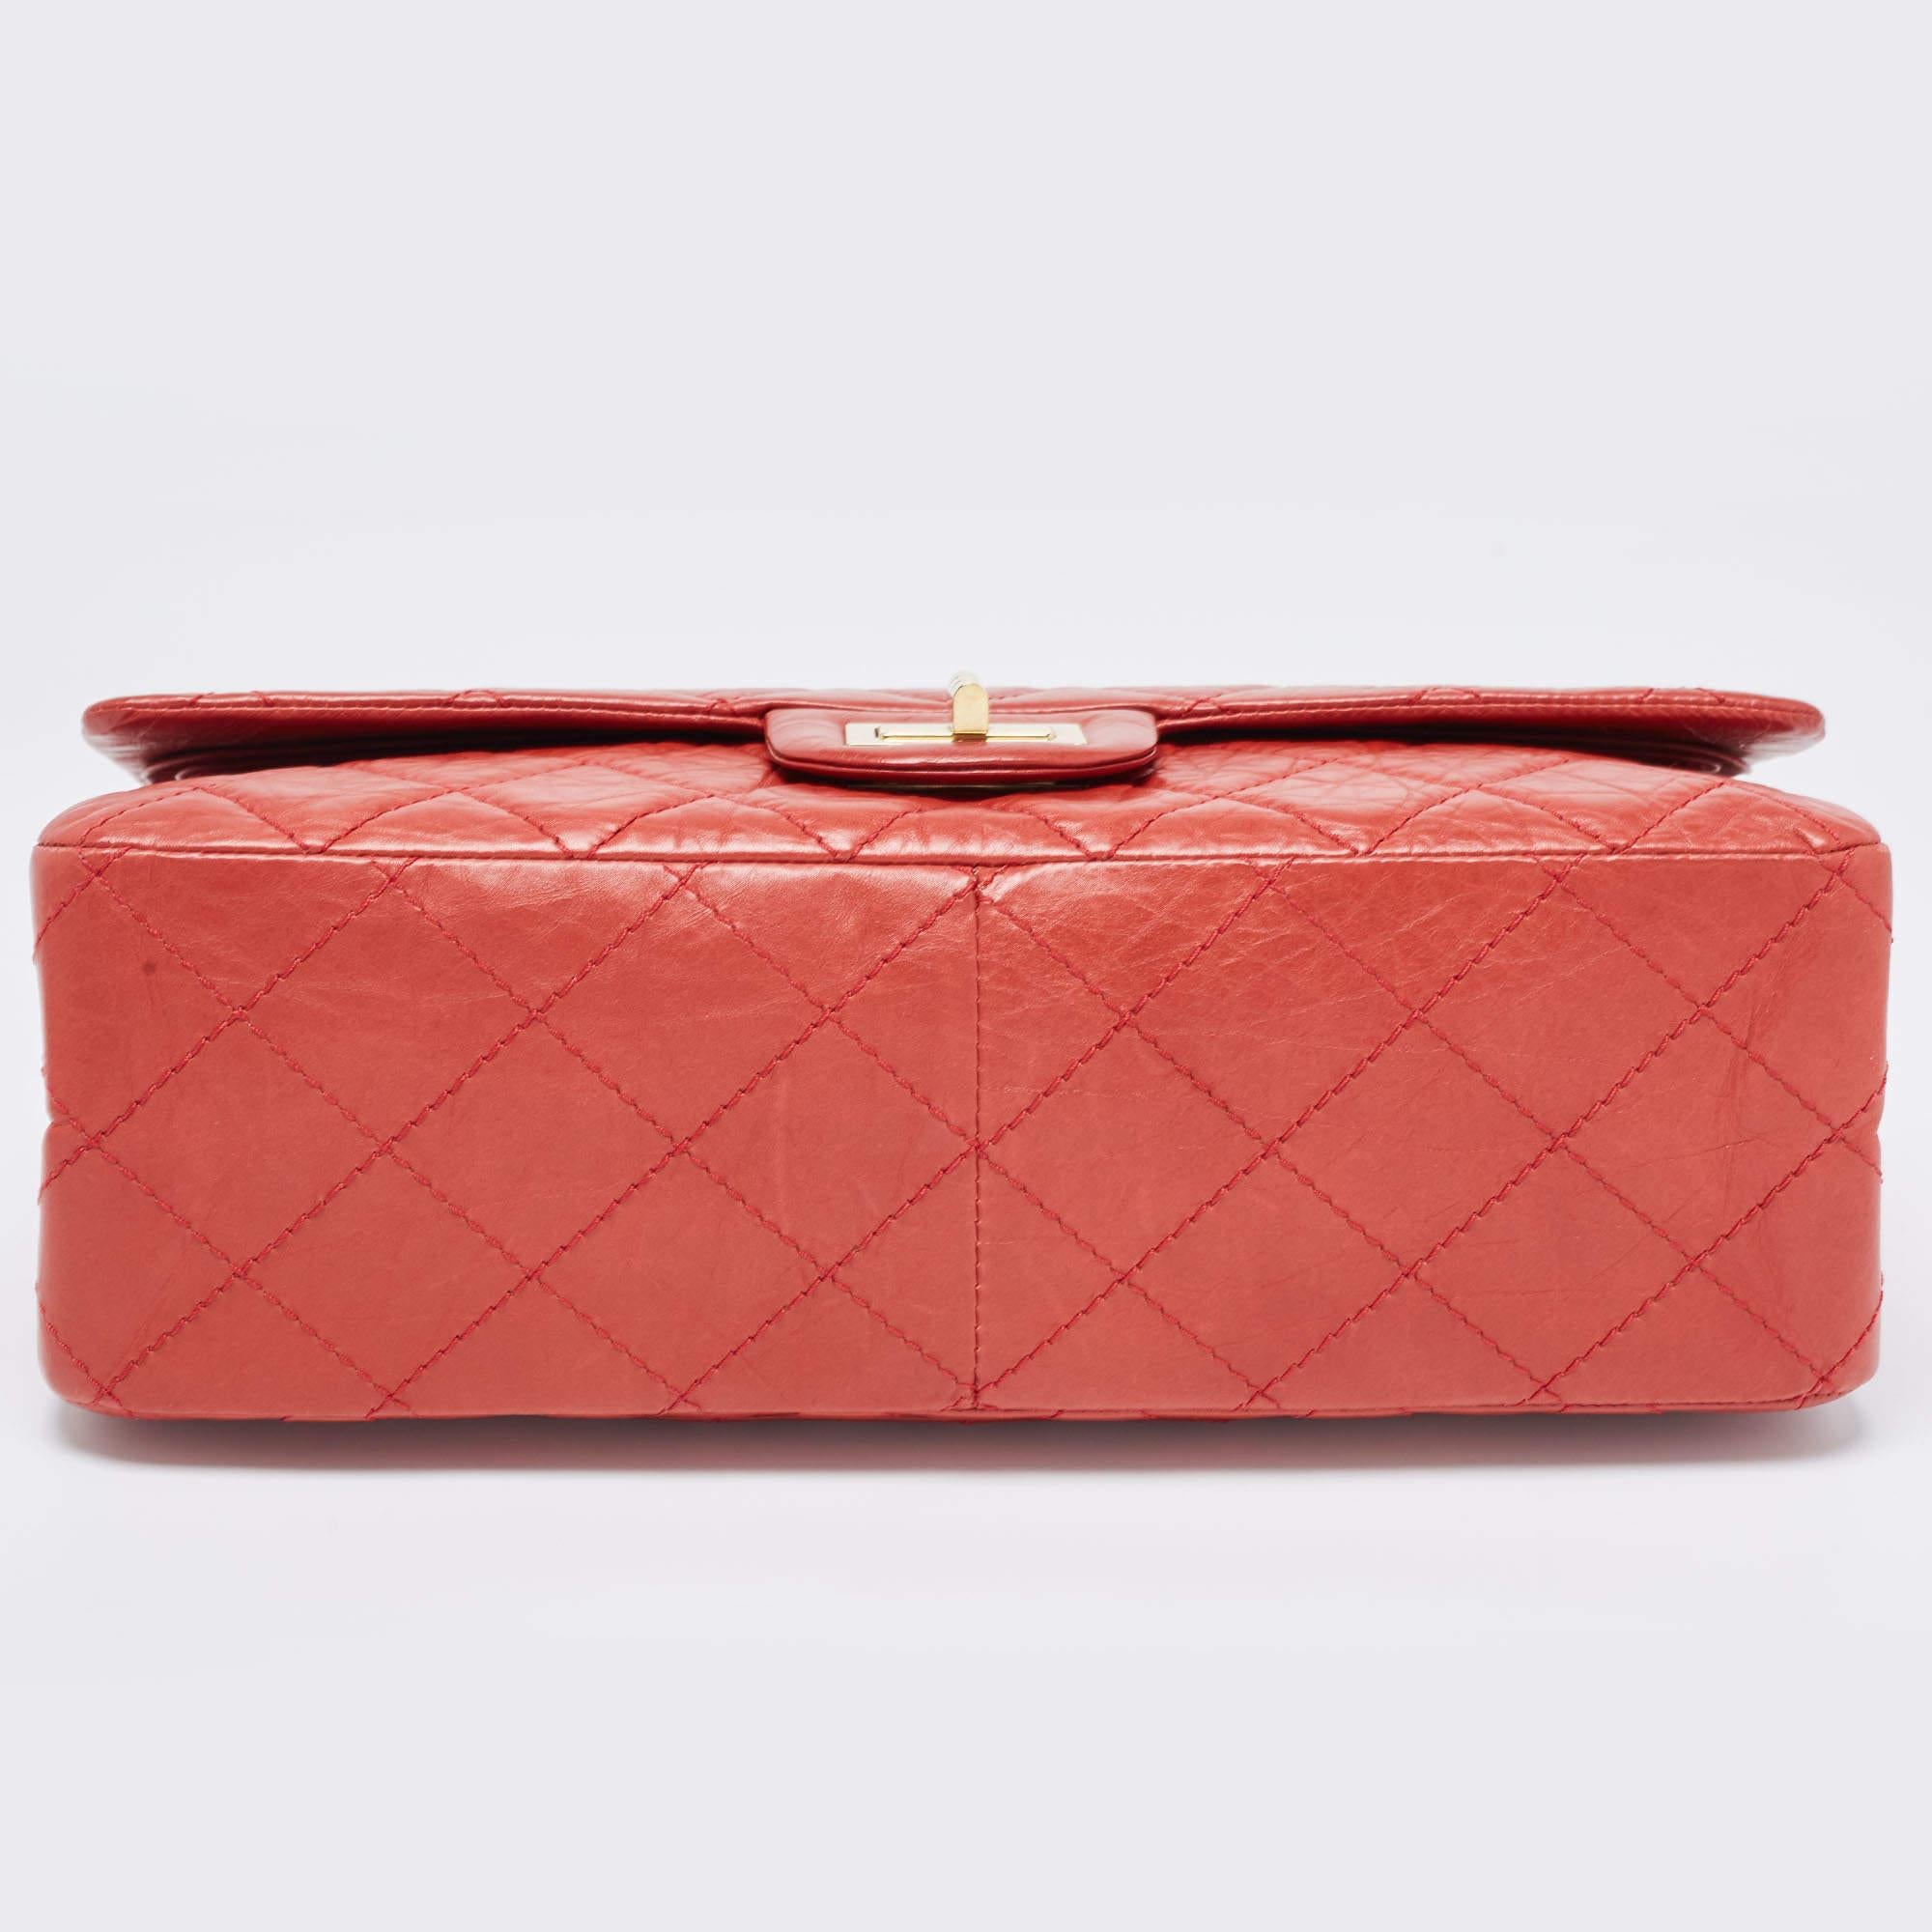 Chanel Red Quilted Aged Leather Reissue 2.55 Classic 227 Flap Bag For Sale 12